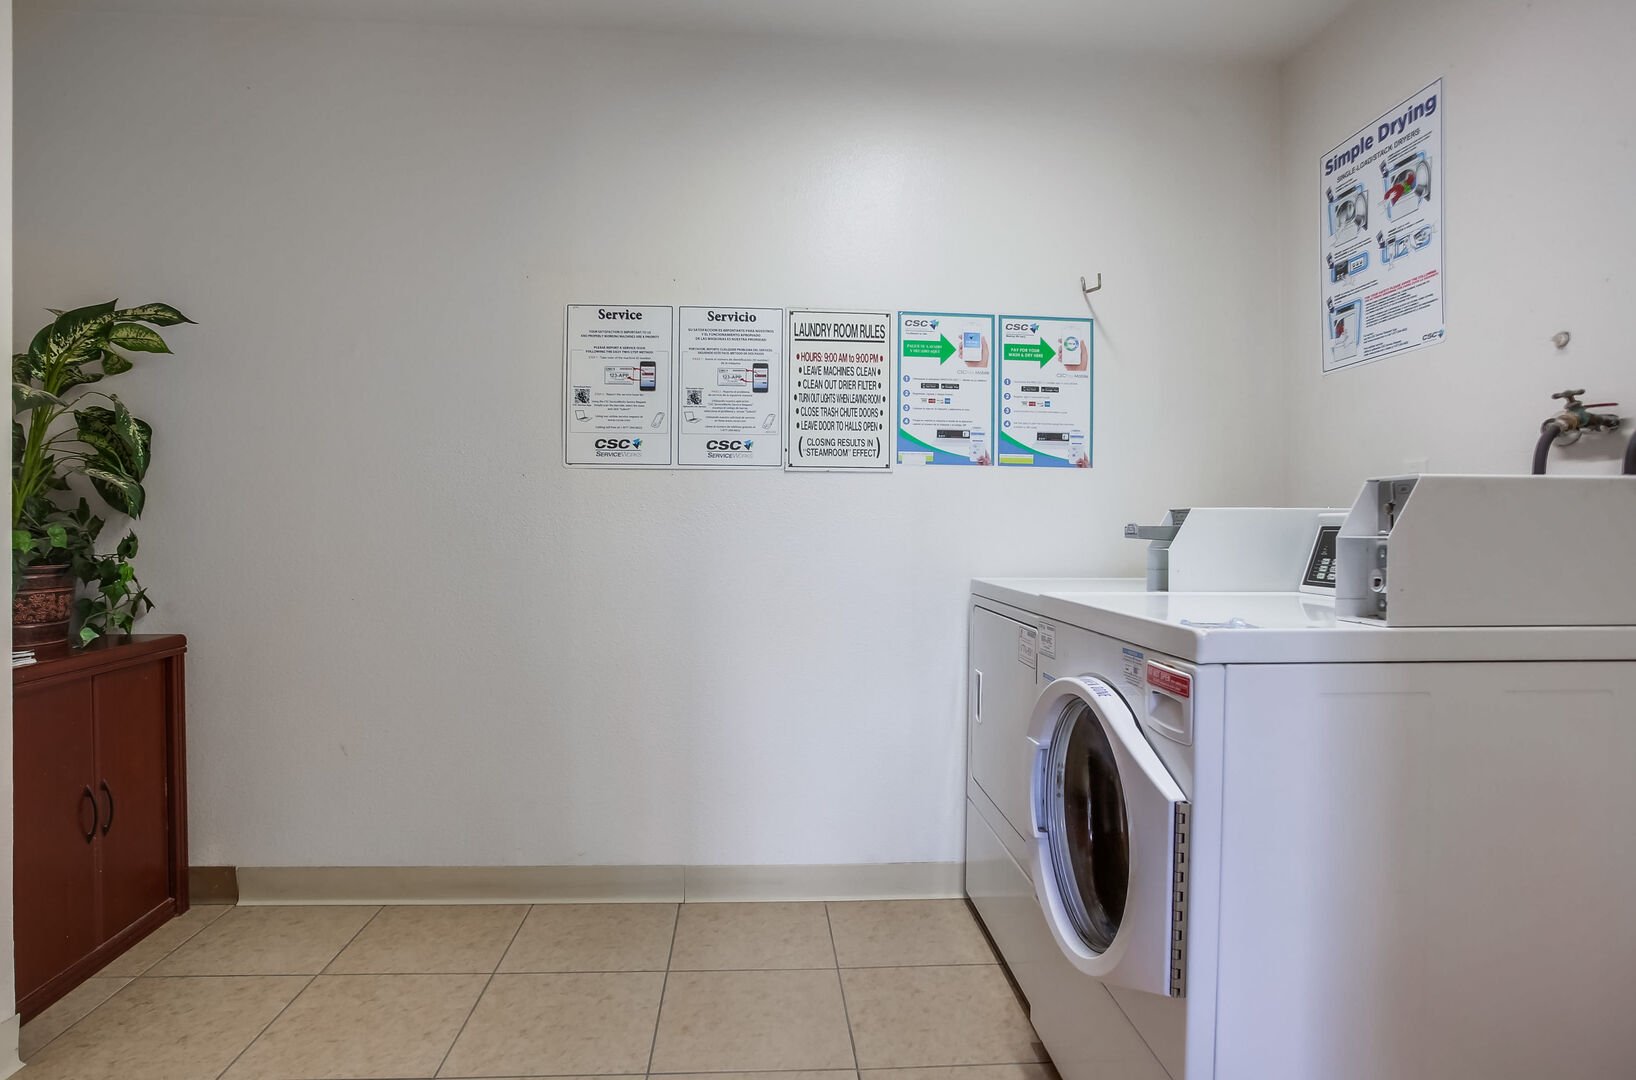 Coin-operated laundry room located on each floor and accessible to guests. Trash chute is located in this room as well.